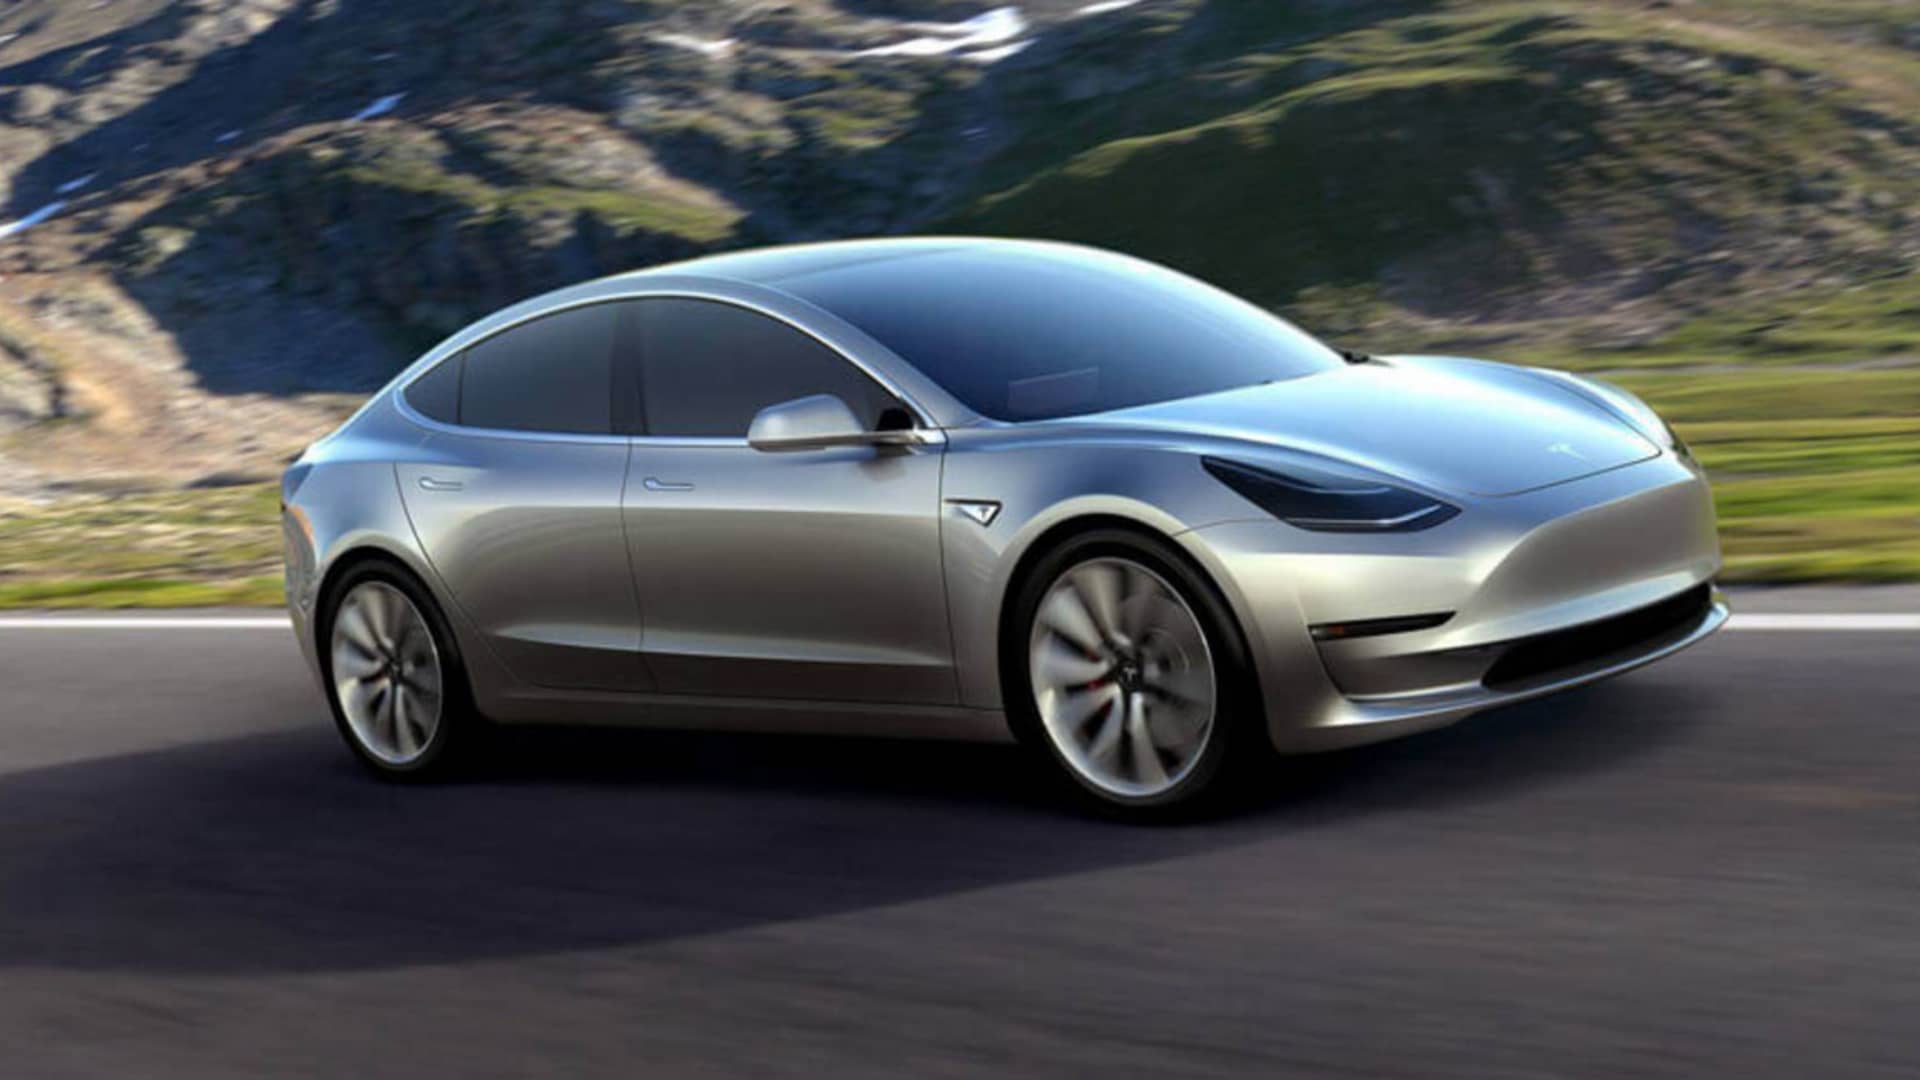 Tesla delivers first Model 3 cars, here's what it's like behind the wheel